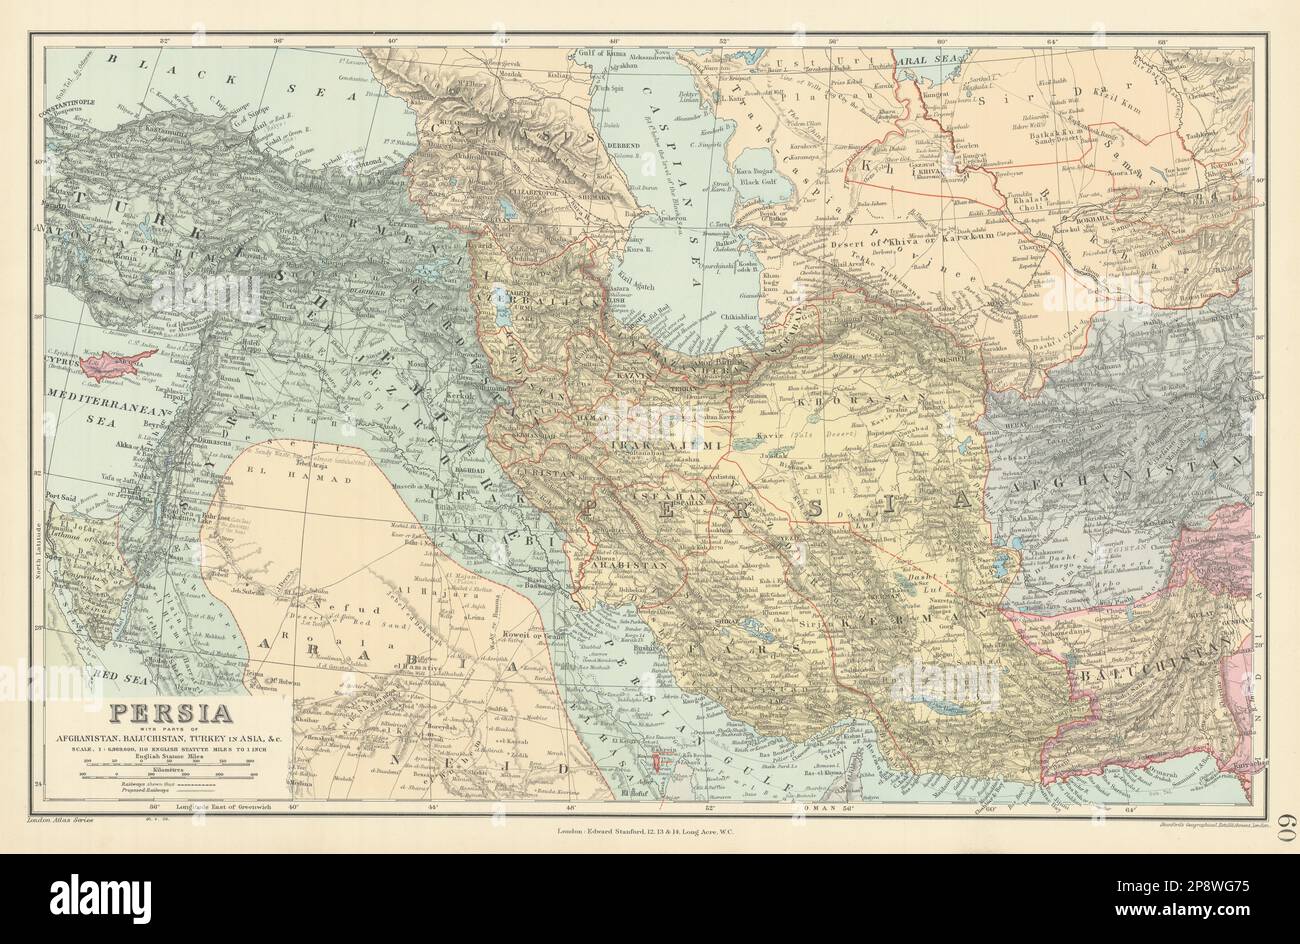 Persia, Afghanistan, Baluchistan, Turkey. South west Asia. STANFORD 1904 map Stock Photo